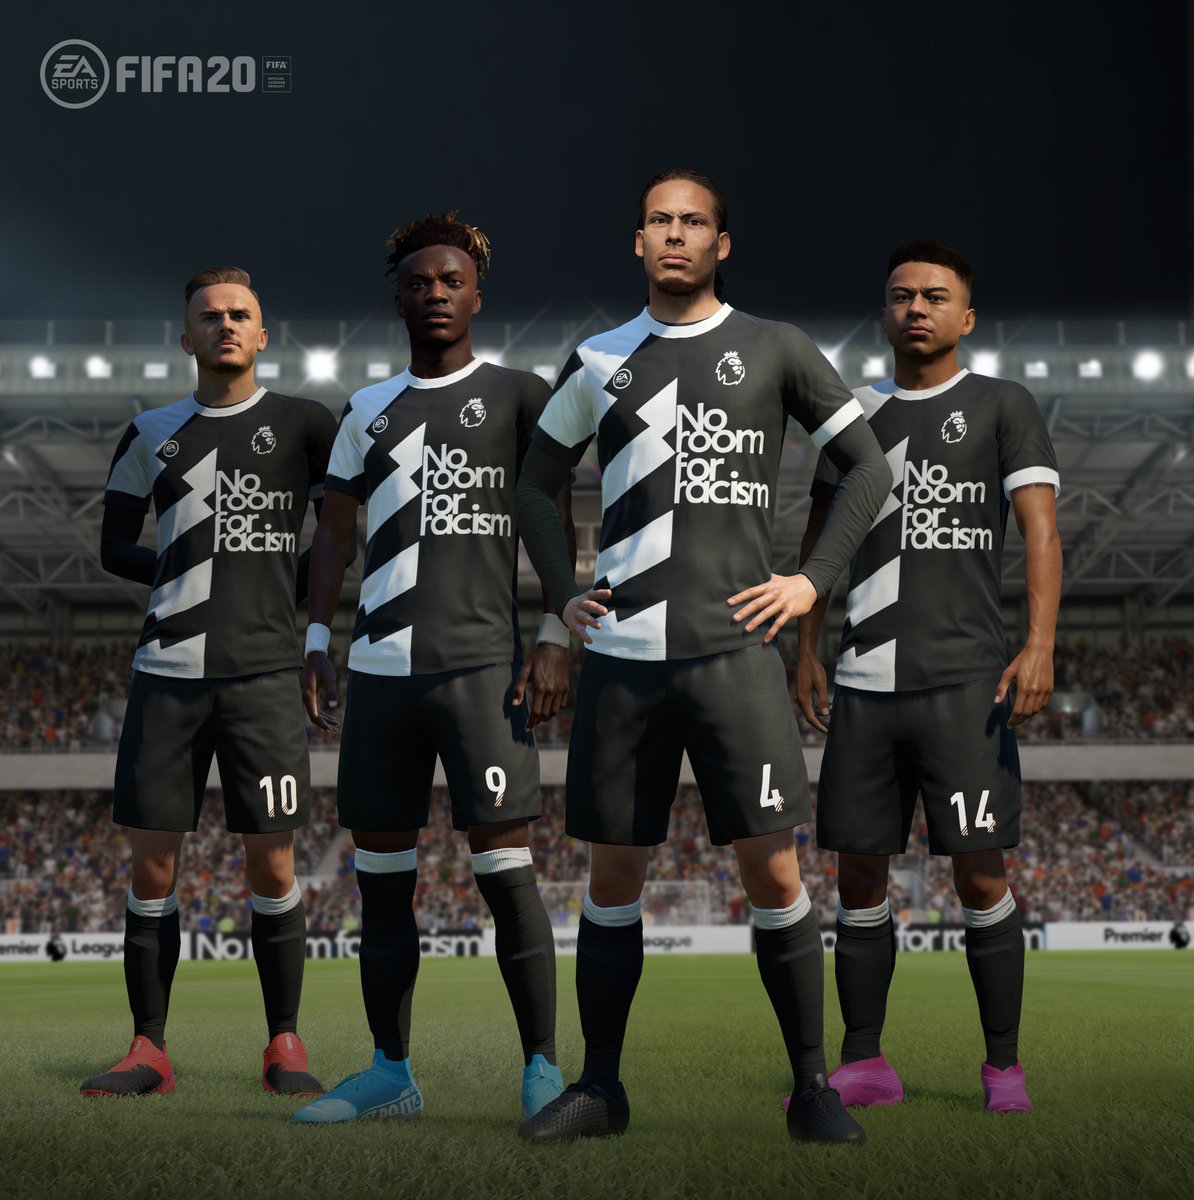 There's #NoRoomForRacism in football. @premierleague

The kits will be available in #FIFA20 soon.